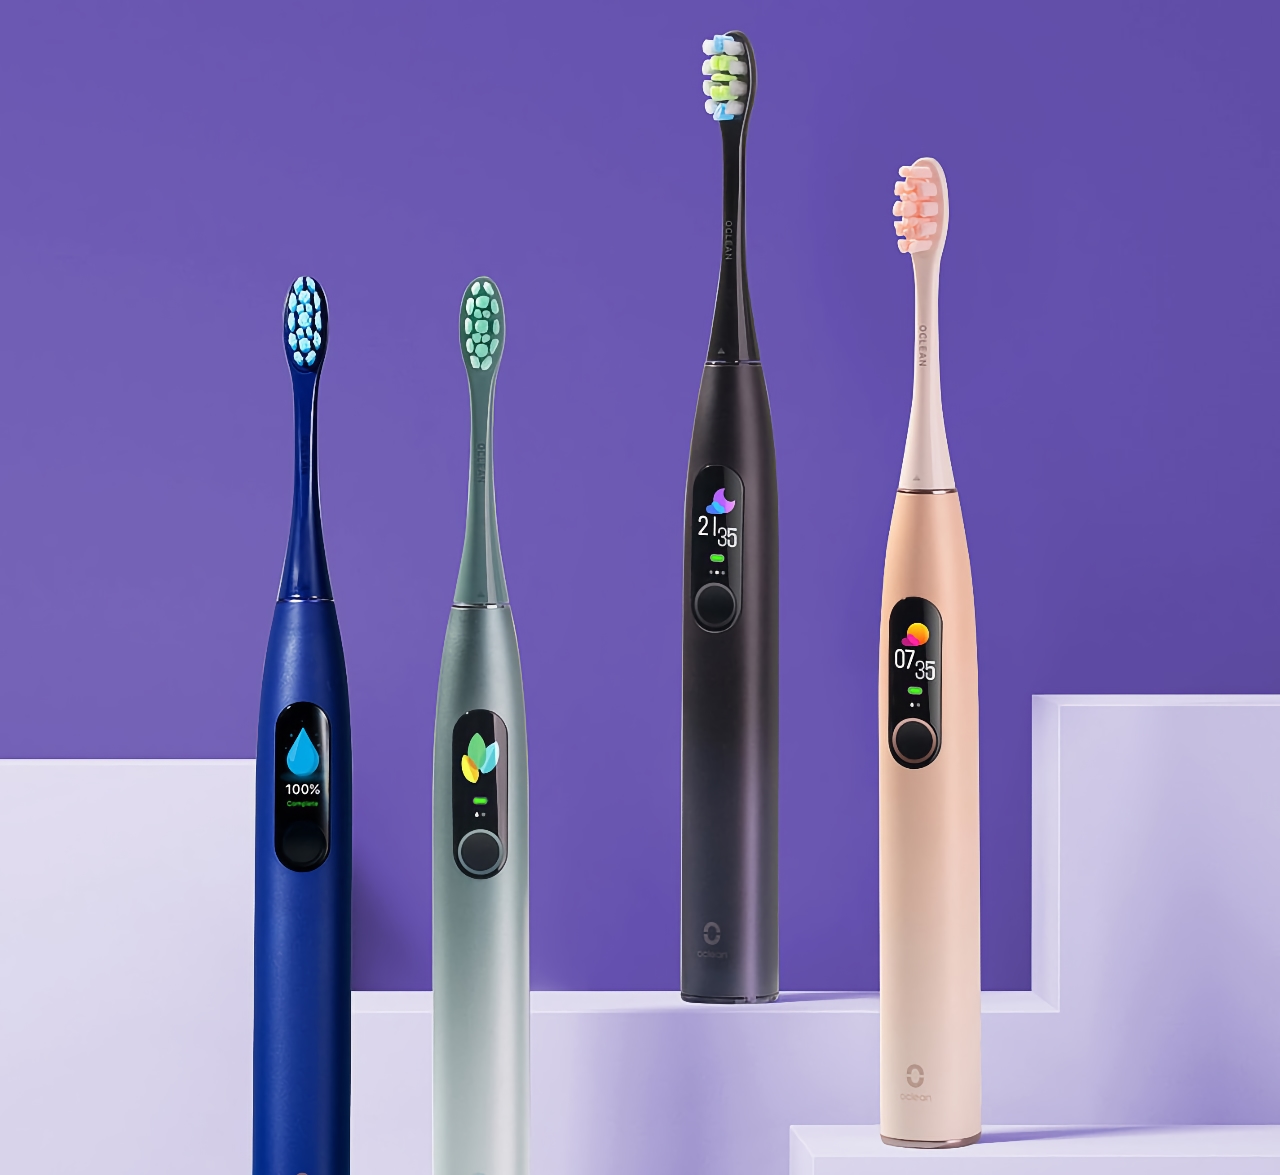 Oclean X Pro Ultrasonic Brush and other company gadgets at a promo price on AliExpress 11.11